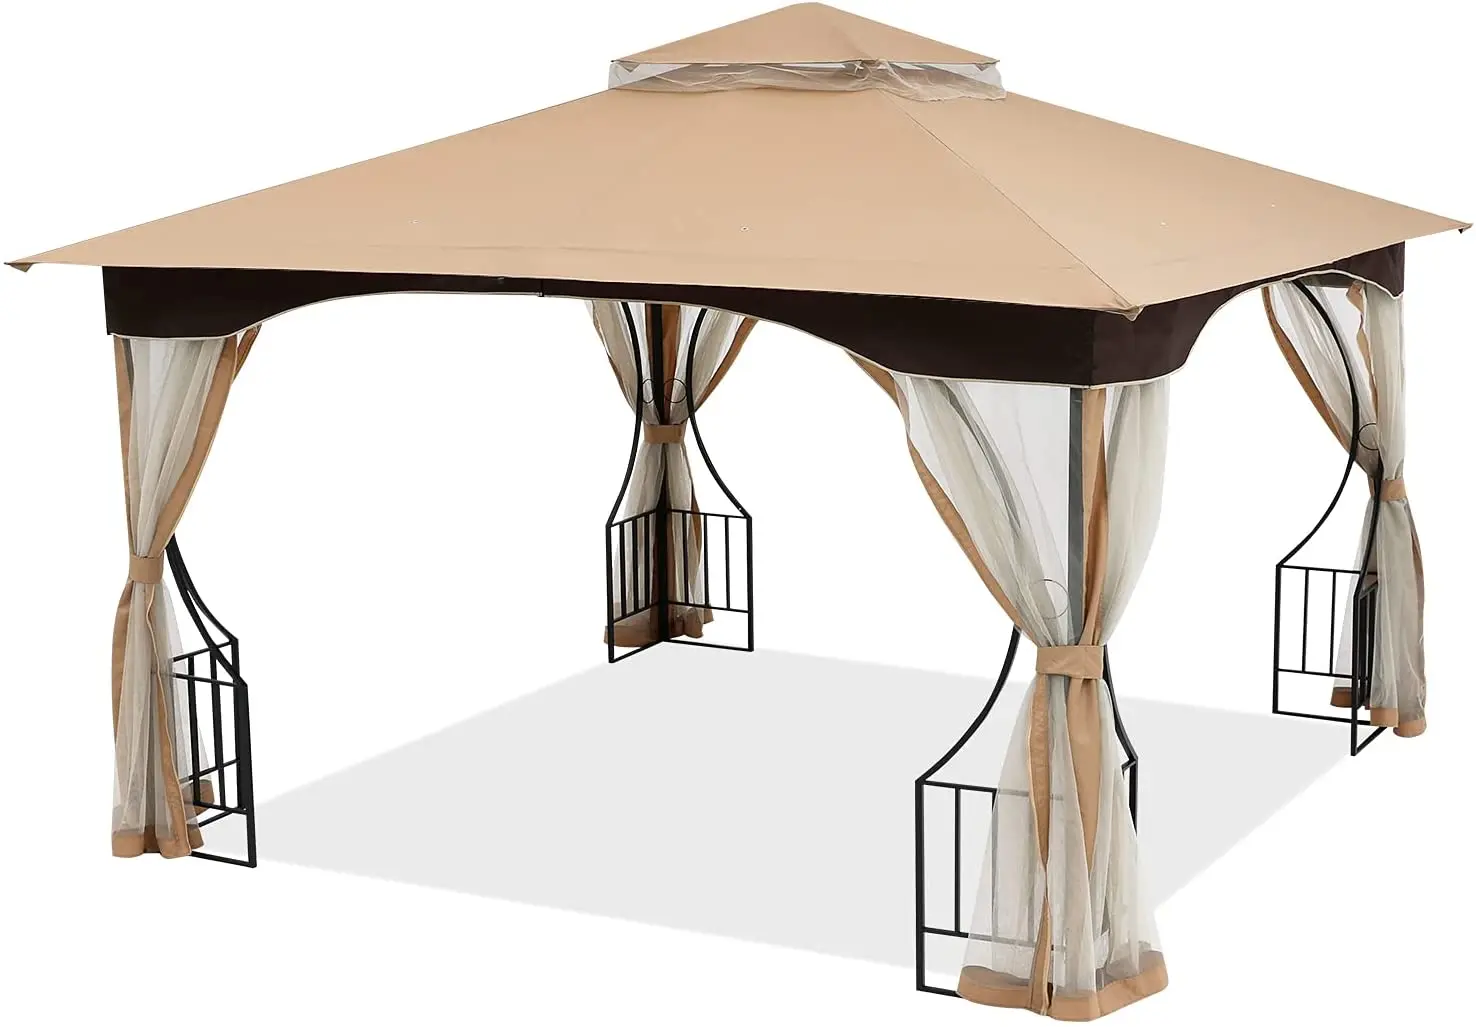 11x11ft New Style Waterproof With Double Roof And Arts Steel Design ...